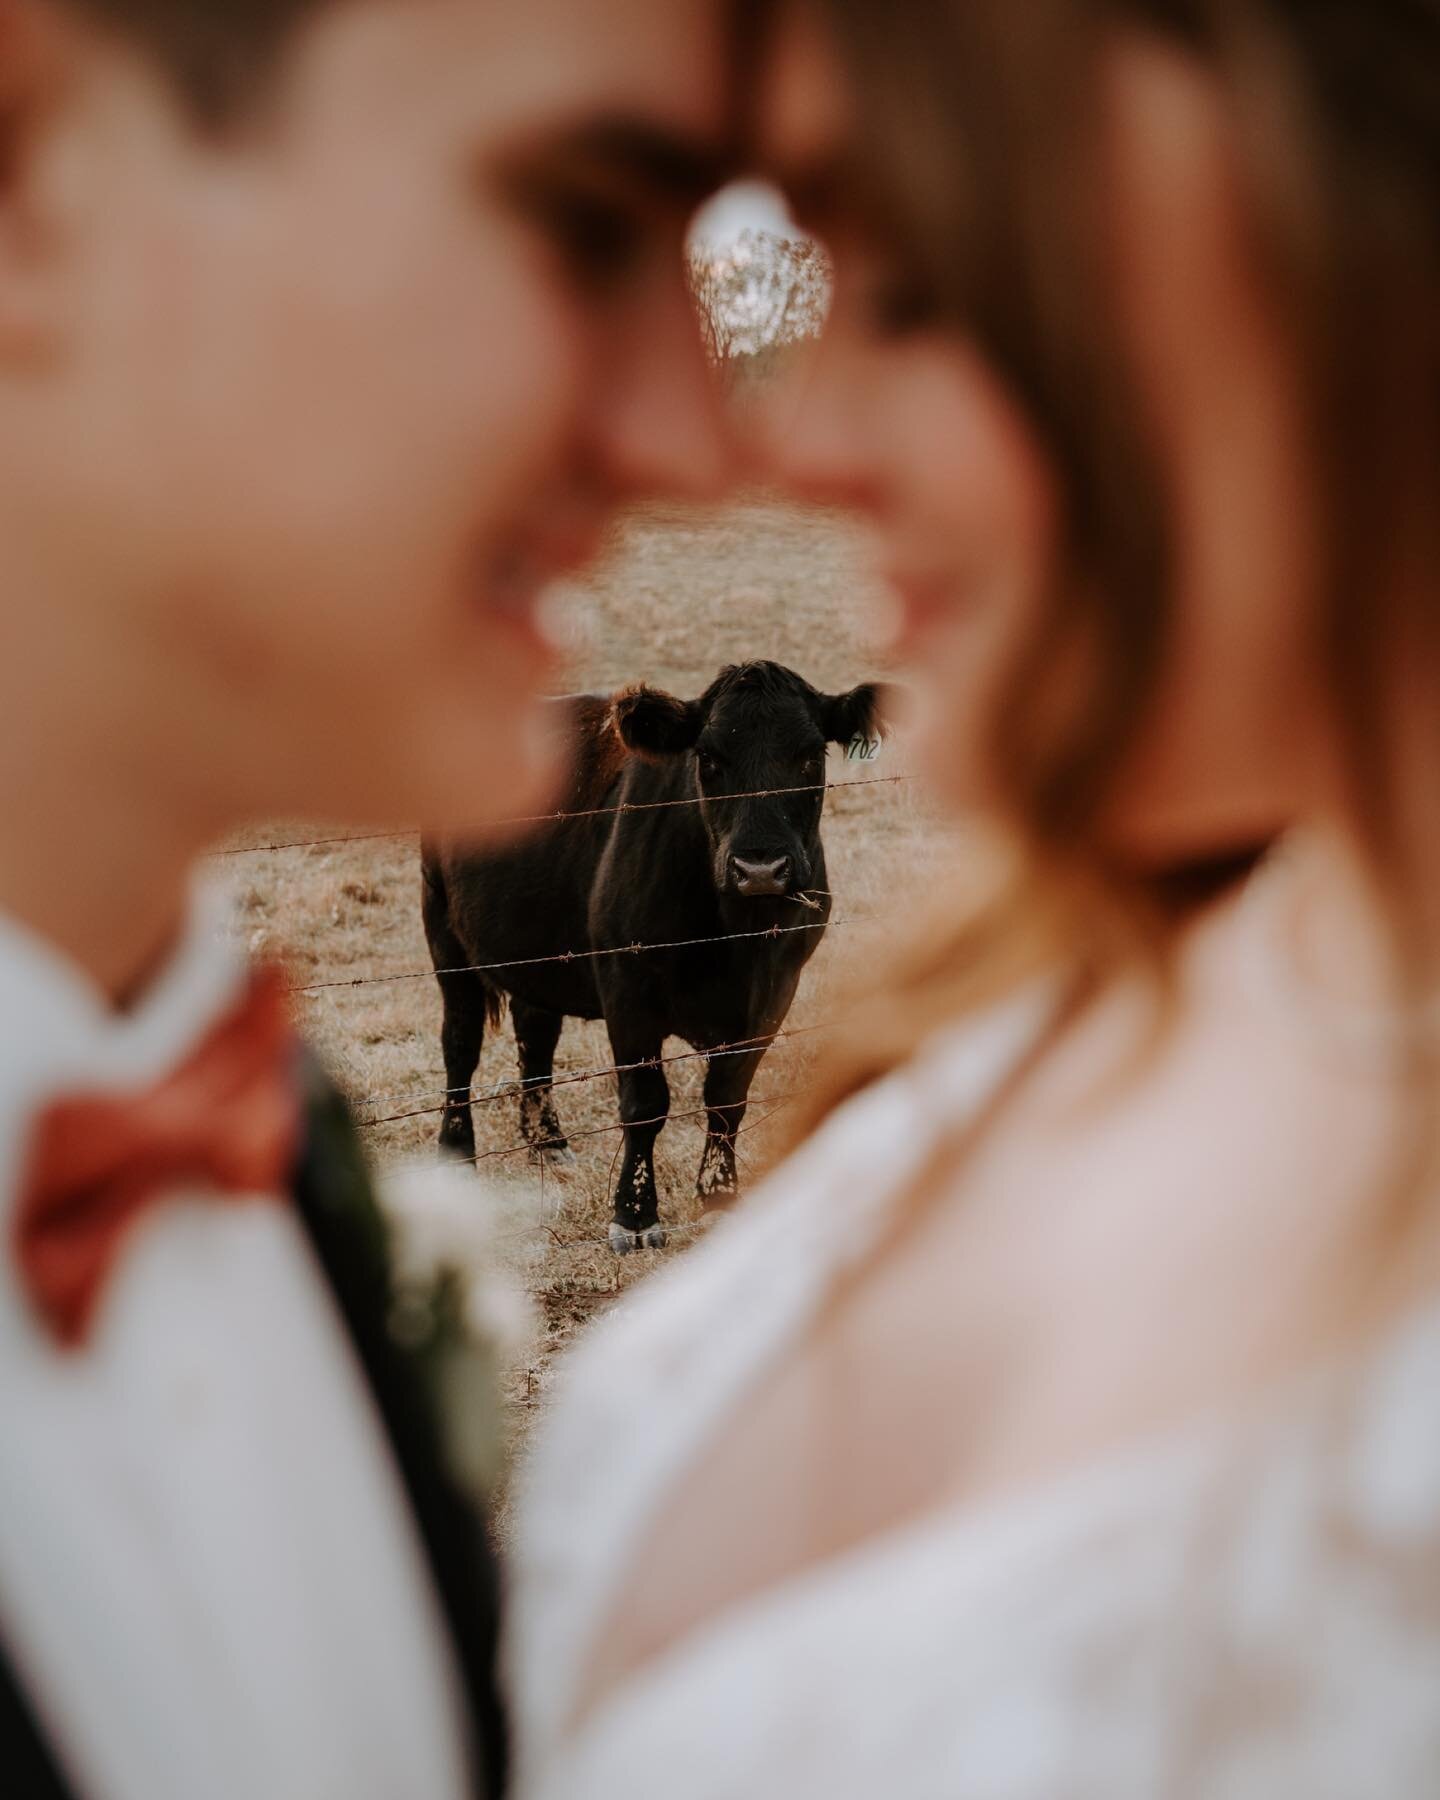 Nothing screams &ldquo;I got married in the Midwest&rdquo; more than having cows in your wedding photos 🐮
.
.
.
.
#indianaweddingphotographer #illinoisweddingphotographer #michiganweddingphotographer #midwestweddingphotographer #indianapolisweddingp